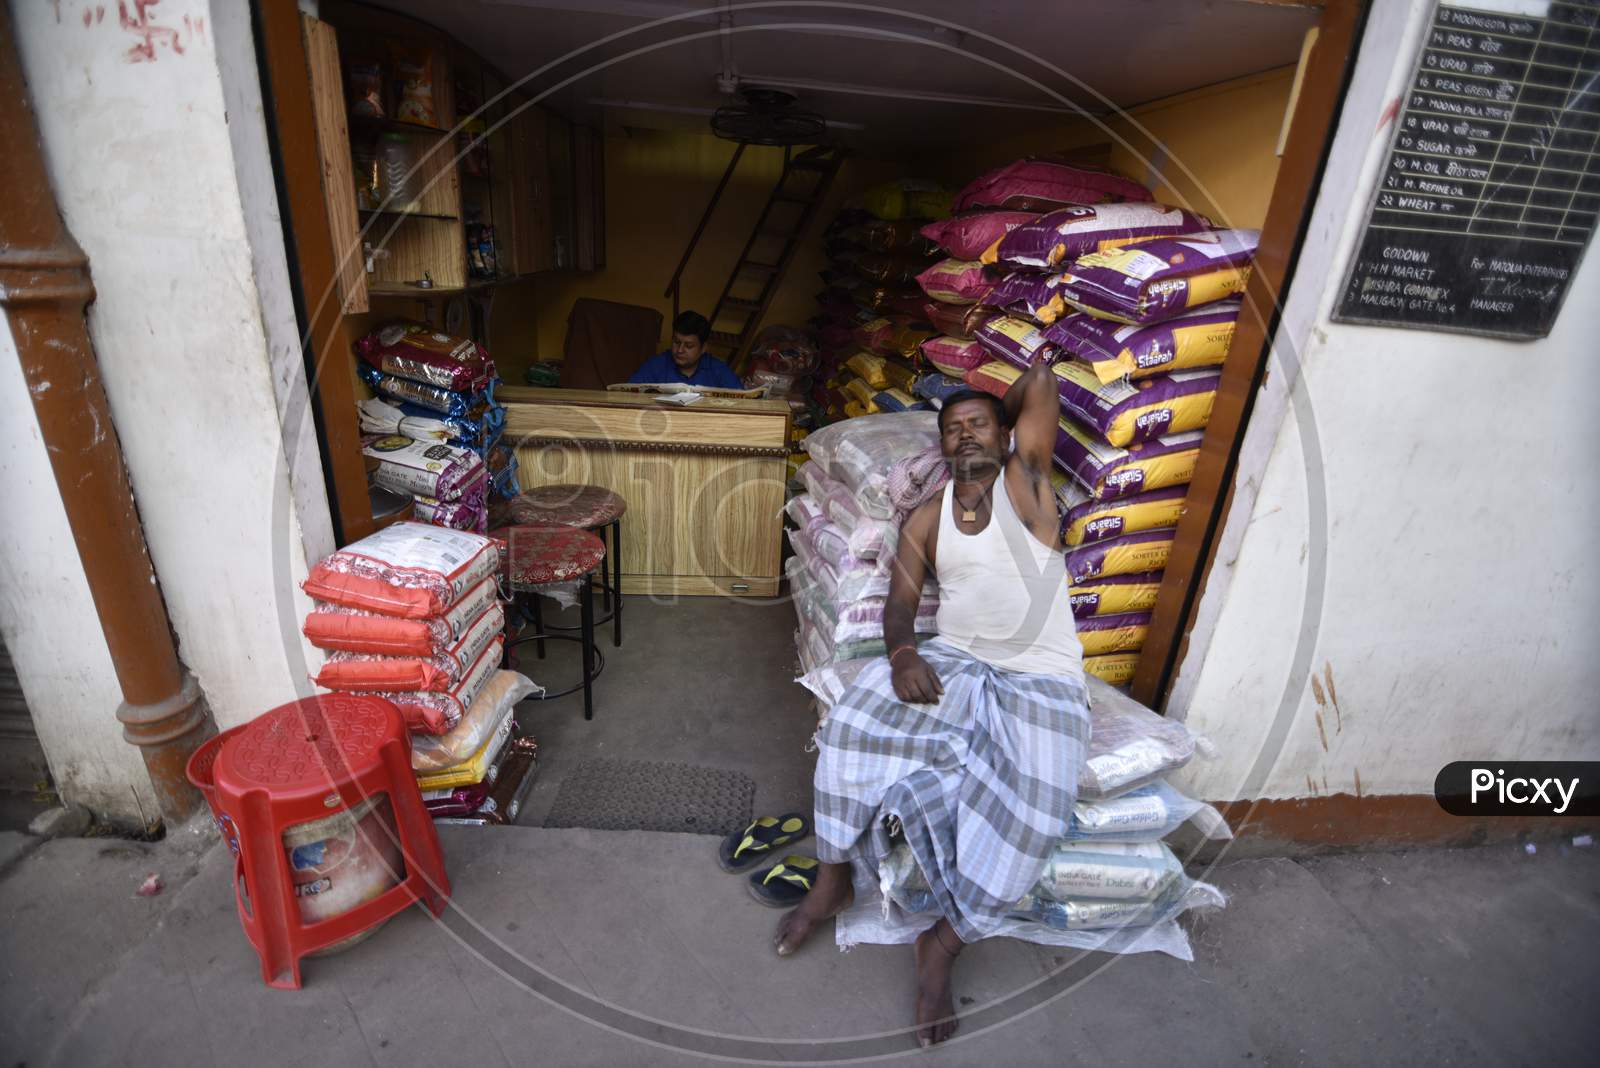 Daily Labor Worker  Taking Rest on Goods Bags At Vendor Shops In Guwahati Fancy Bazaar